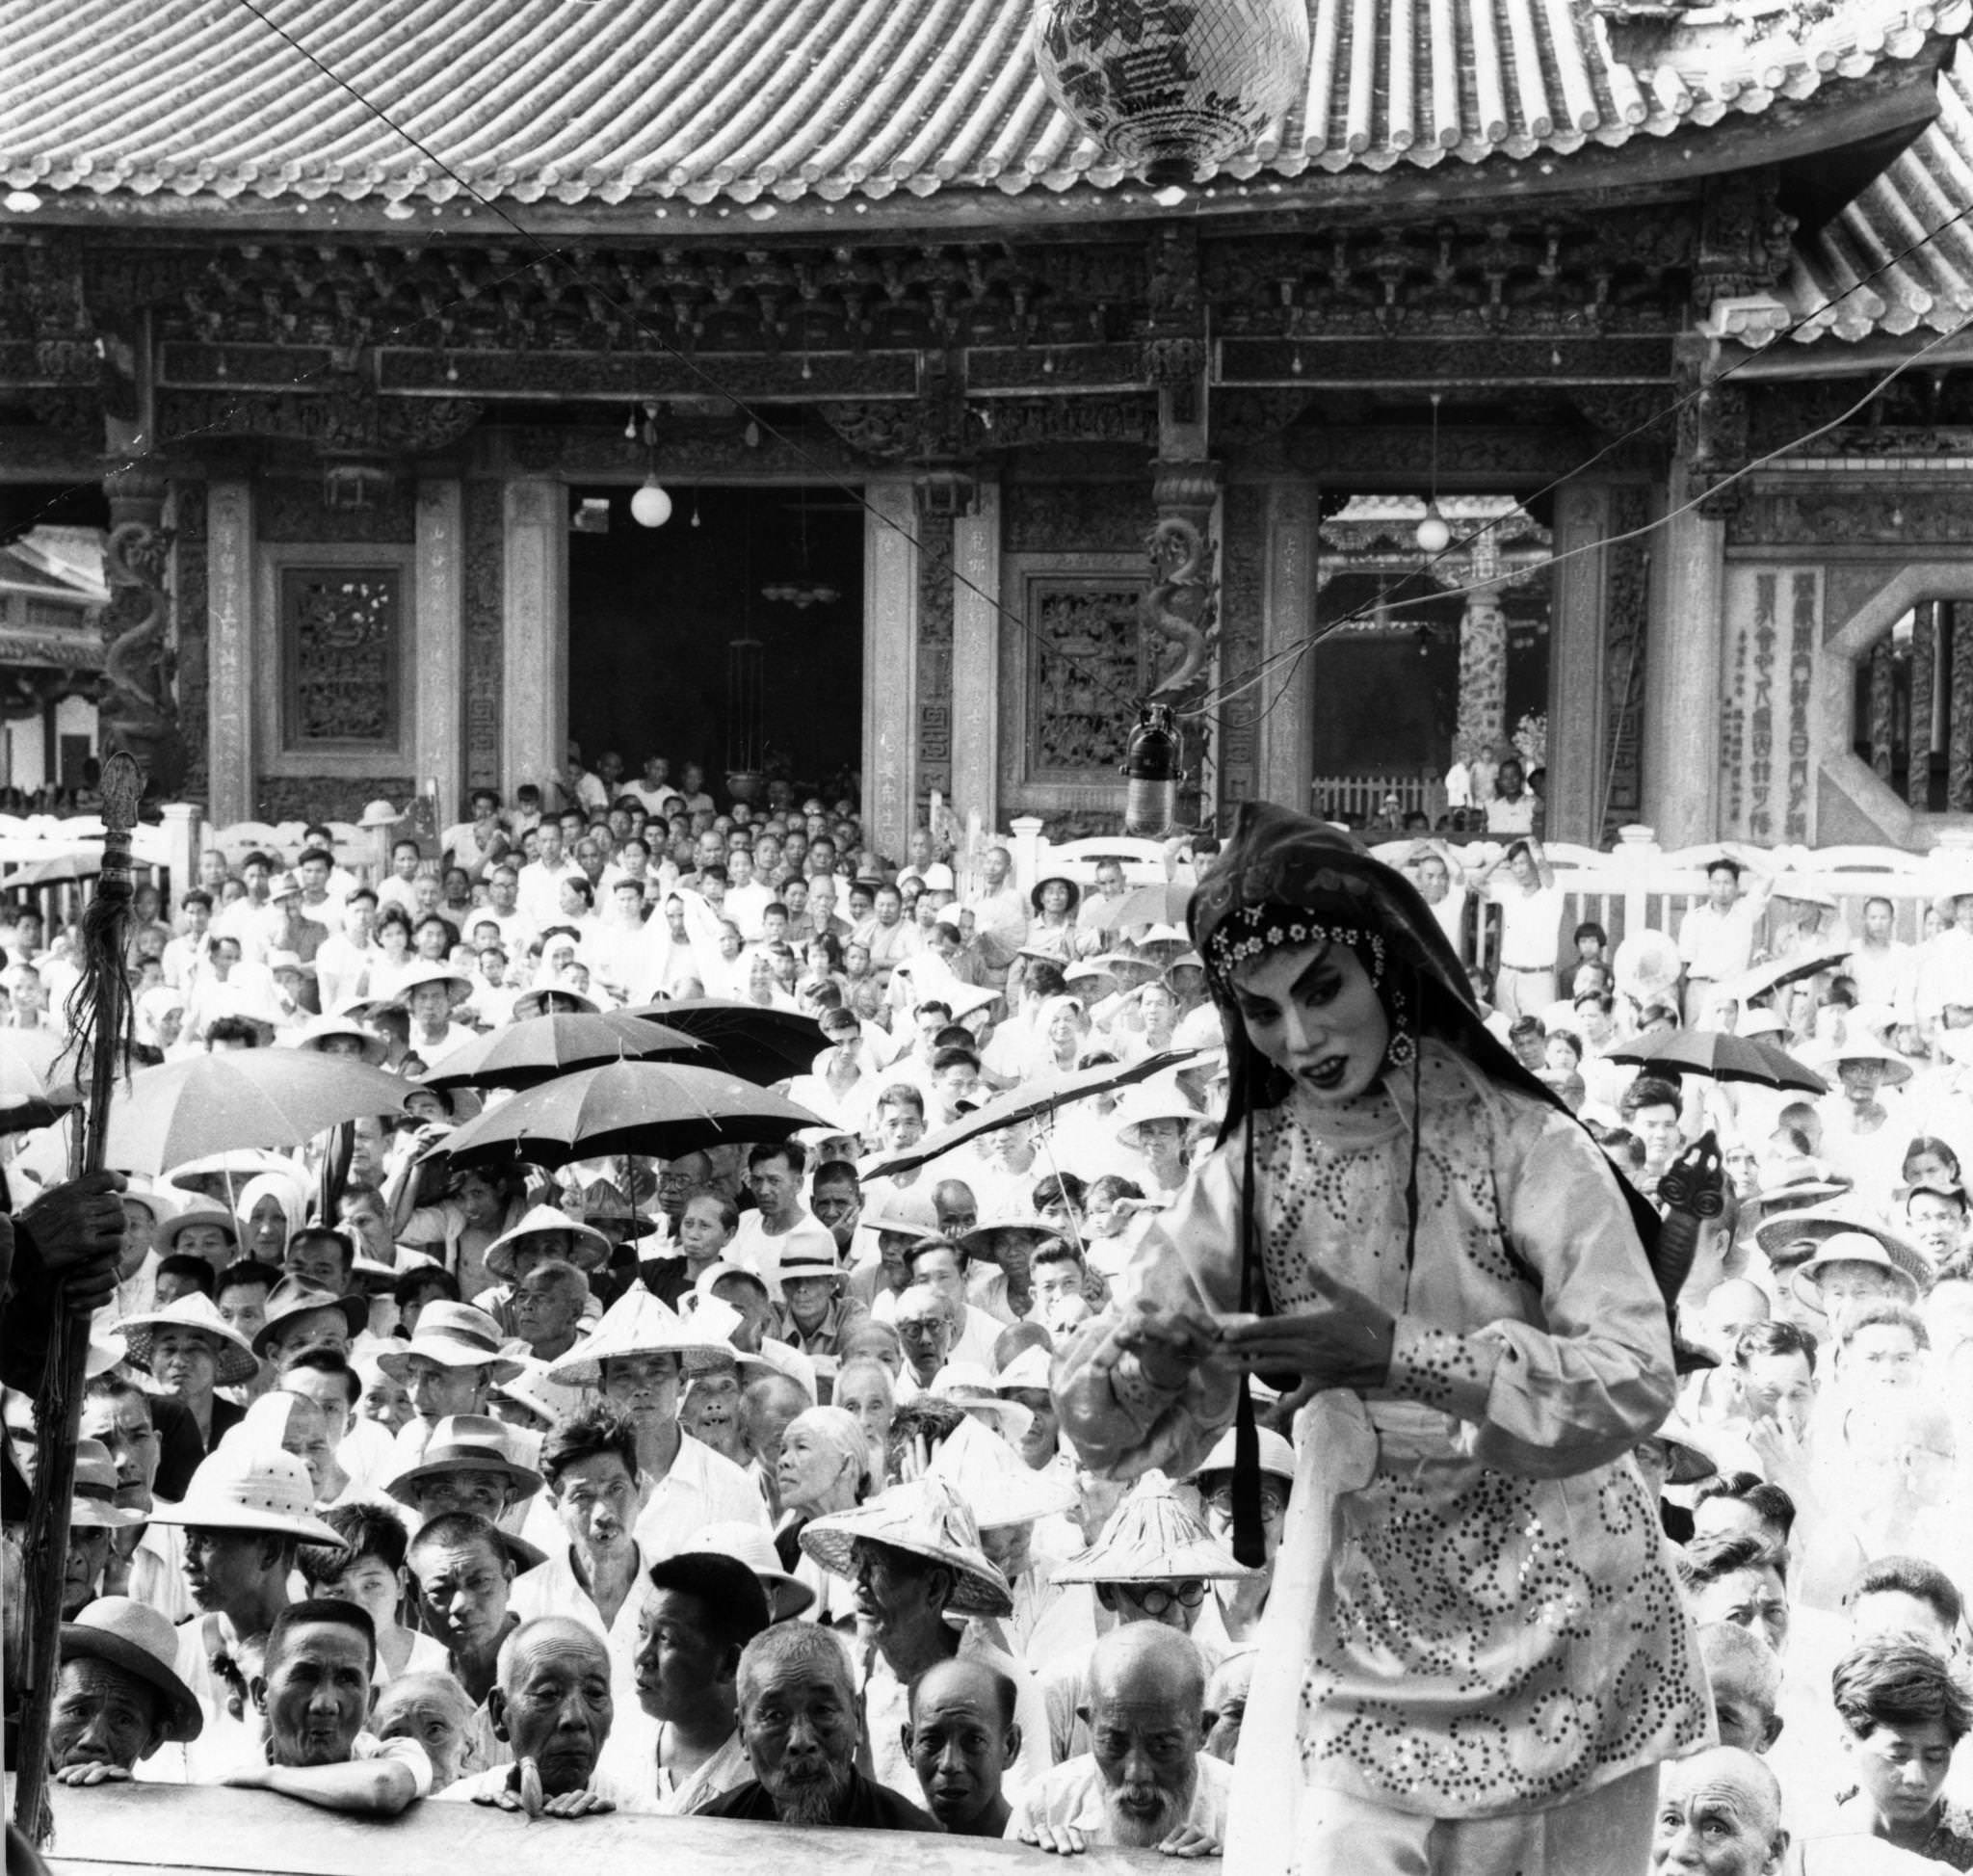 A Chinese classical actress during a performance outdoors at Taipei watched by a large audience, Taiwan, 1955